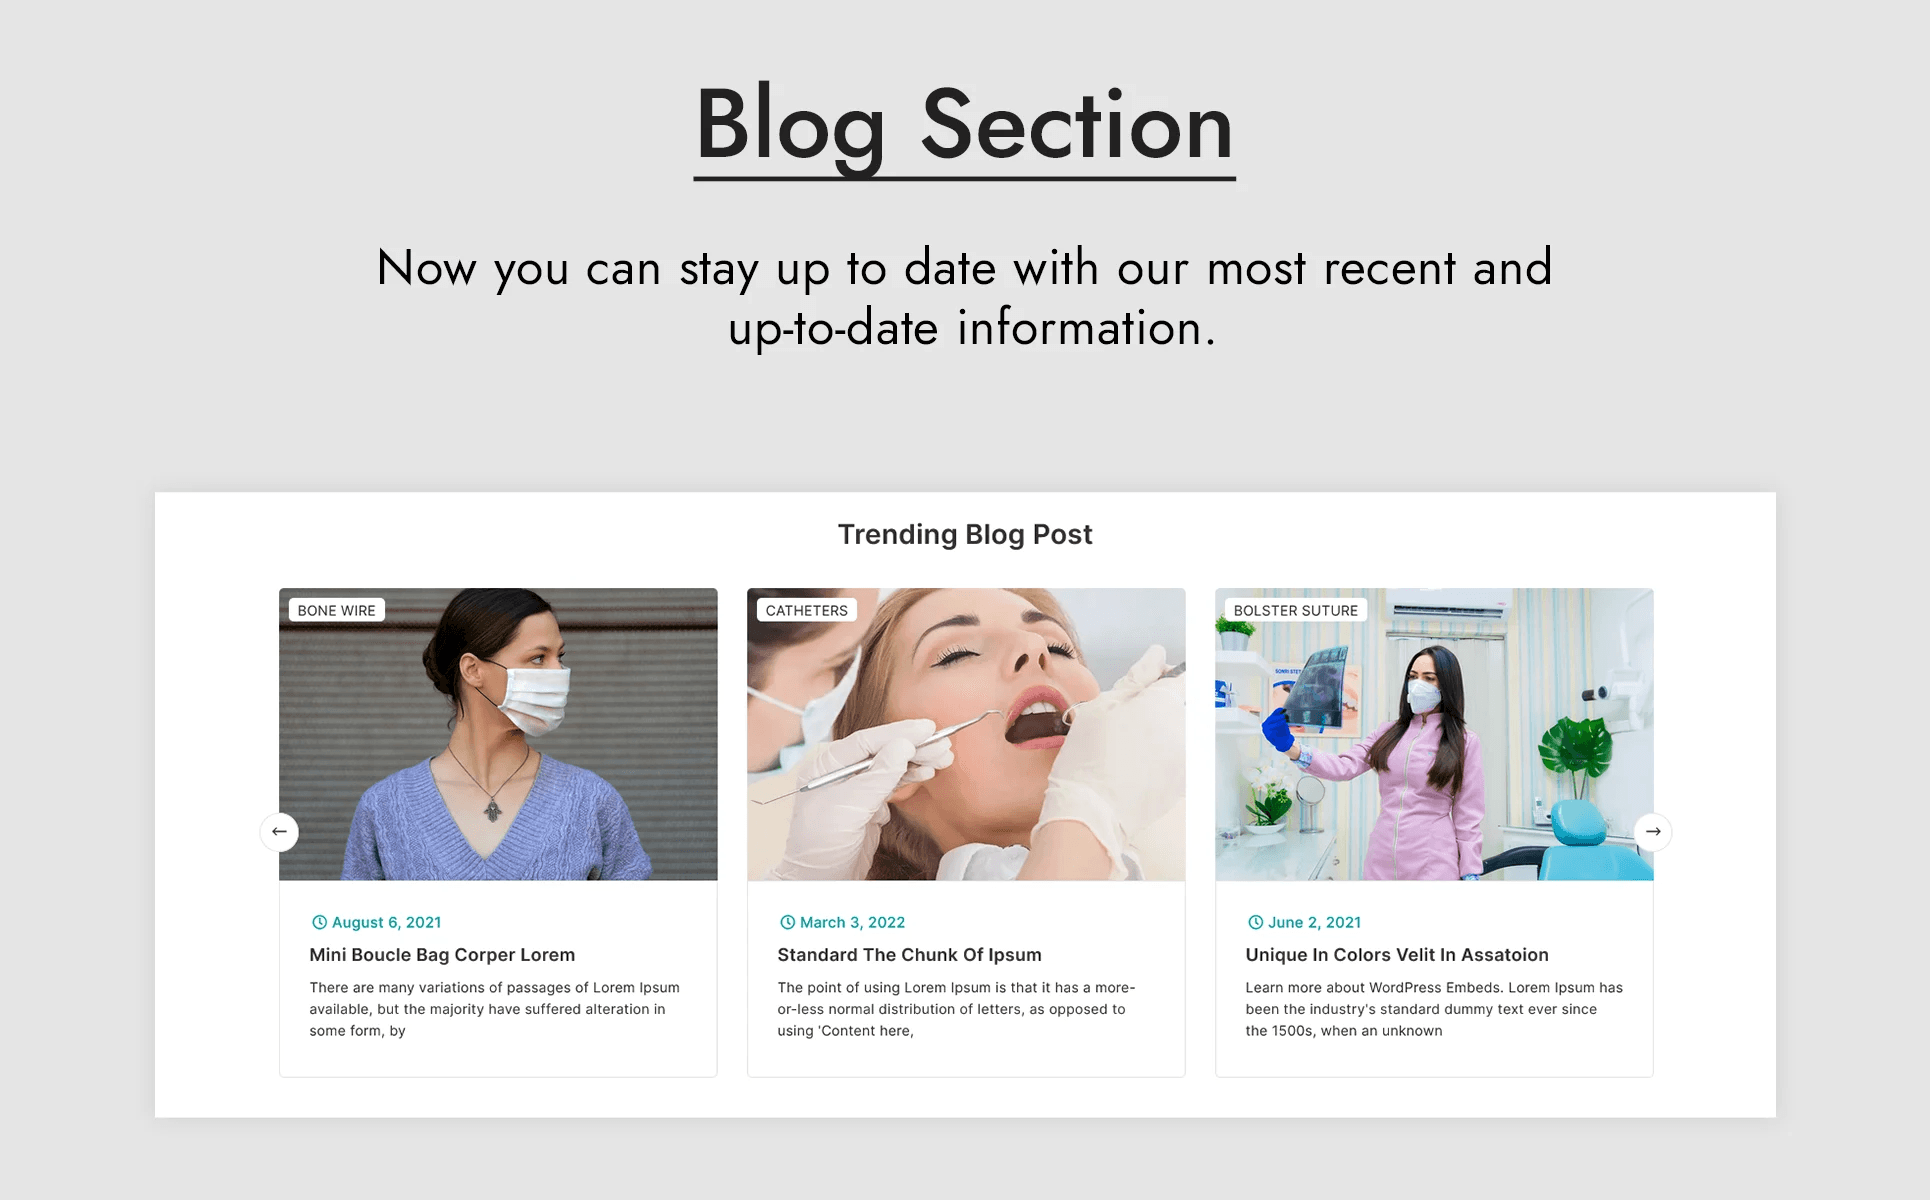 Pictures of the blog with doctors.